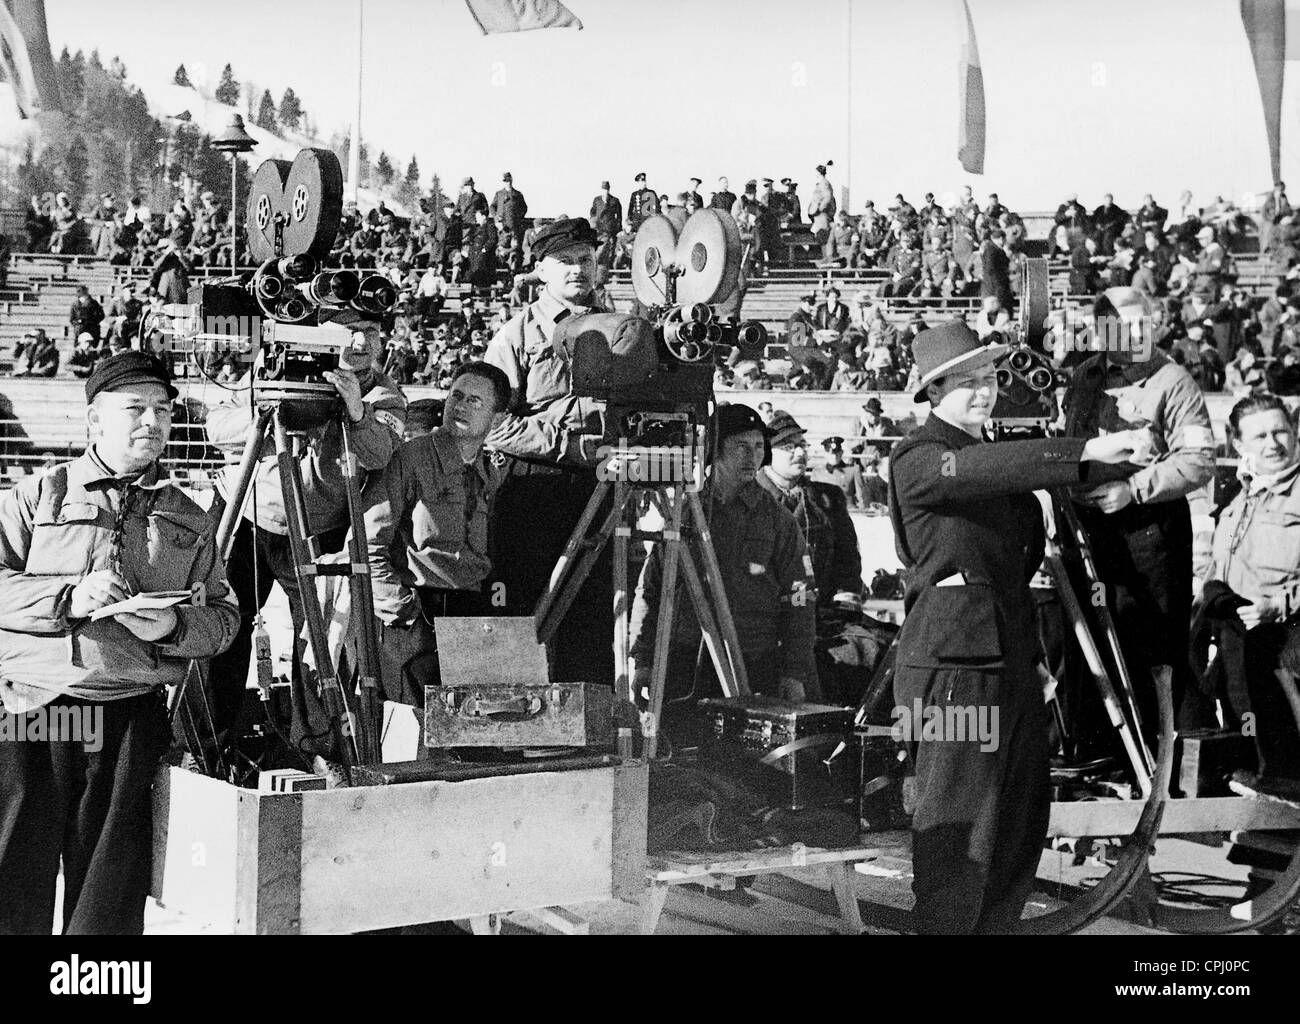 Cameramen at the Olympic Games, 1936 Stock Photo